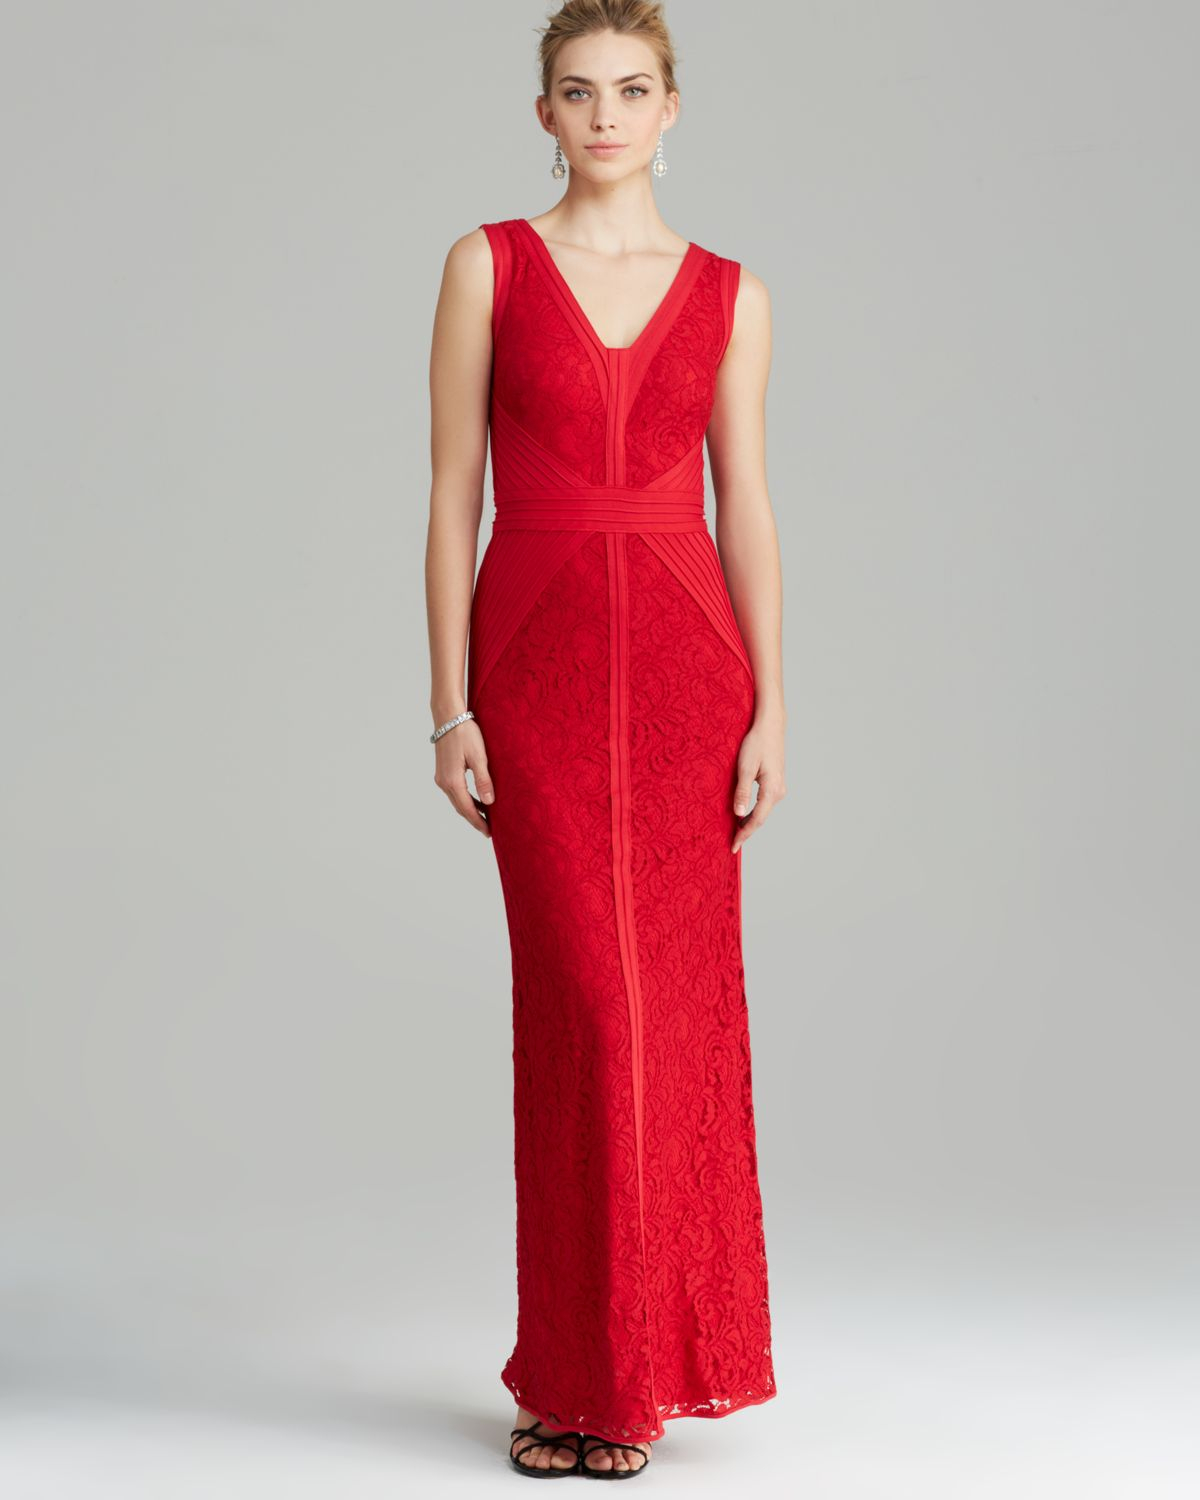 Lyst - Tadashi Shoji Gown - Sleeveless V Neck Banded Waist Lace in Red